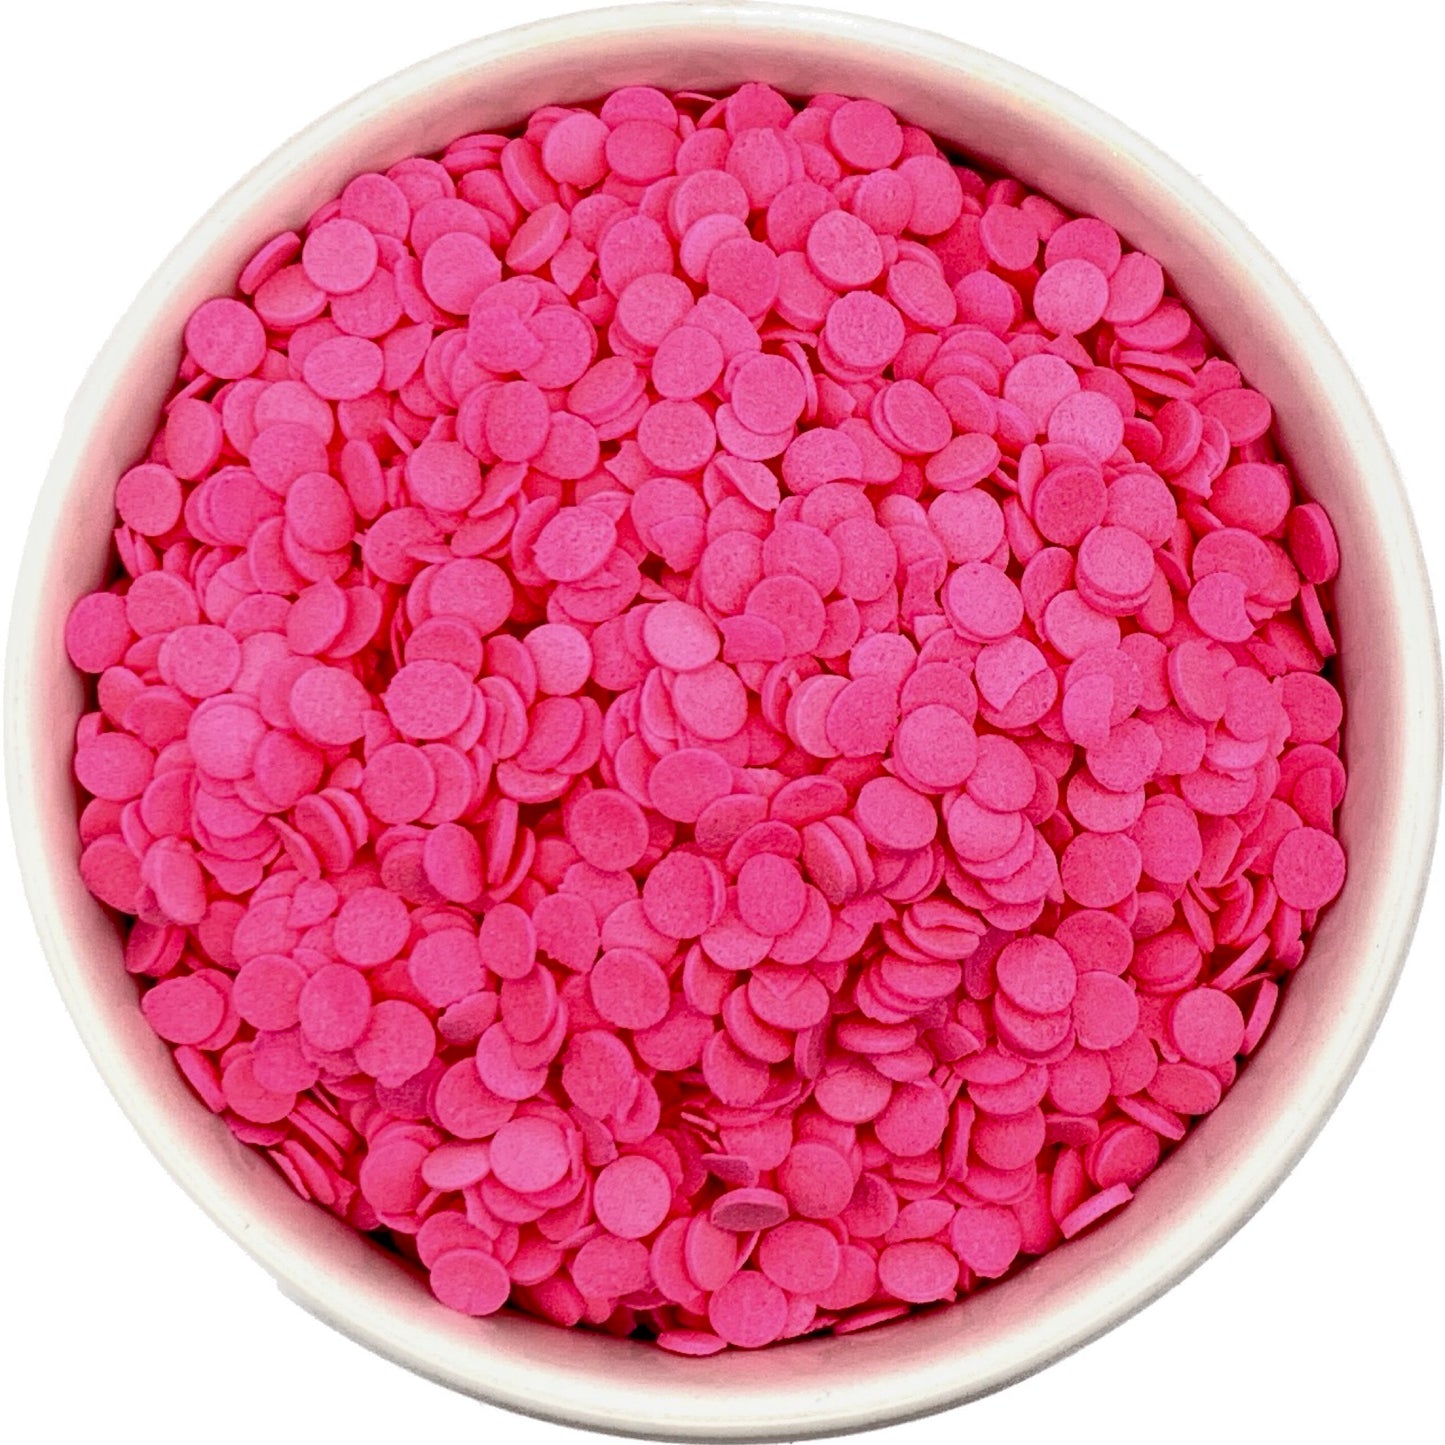 Pink Quins Sprinkles in a White Bowl